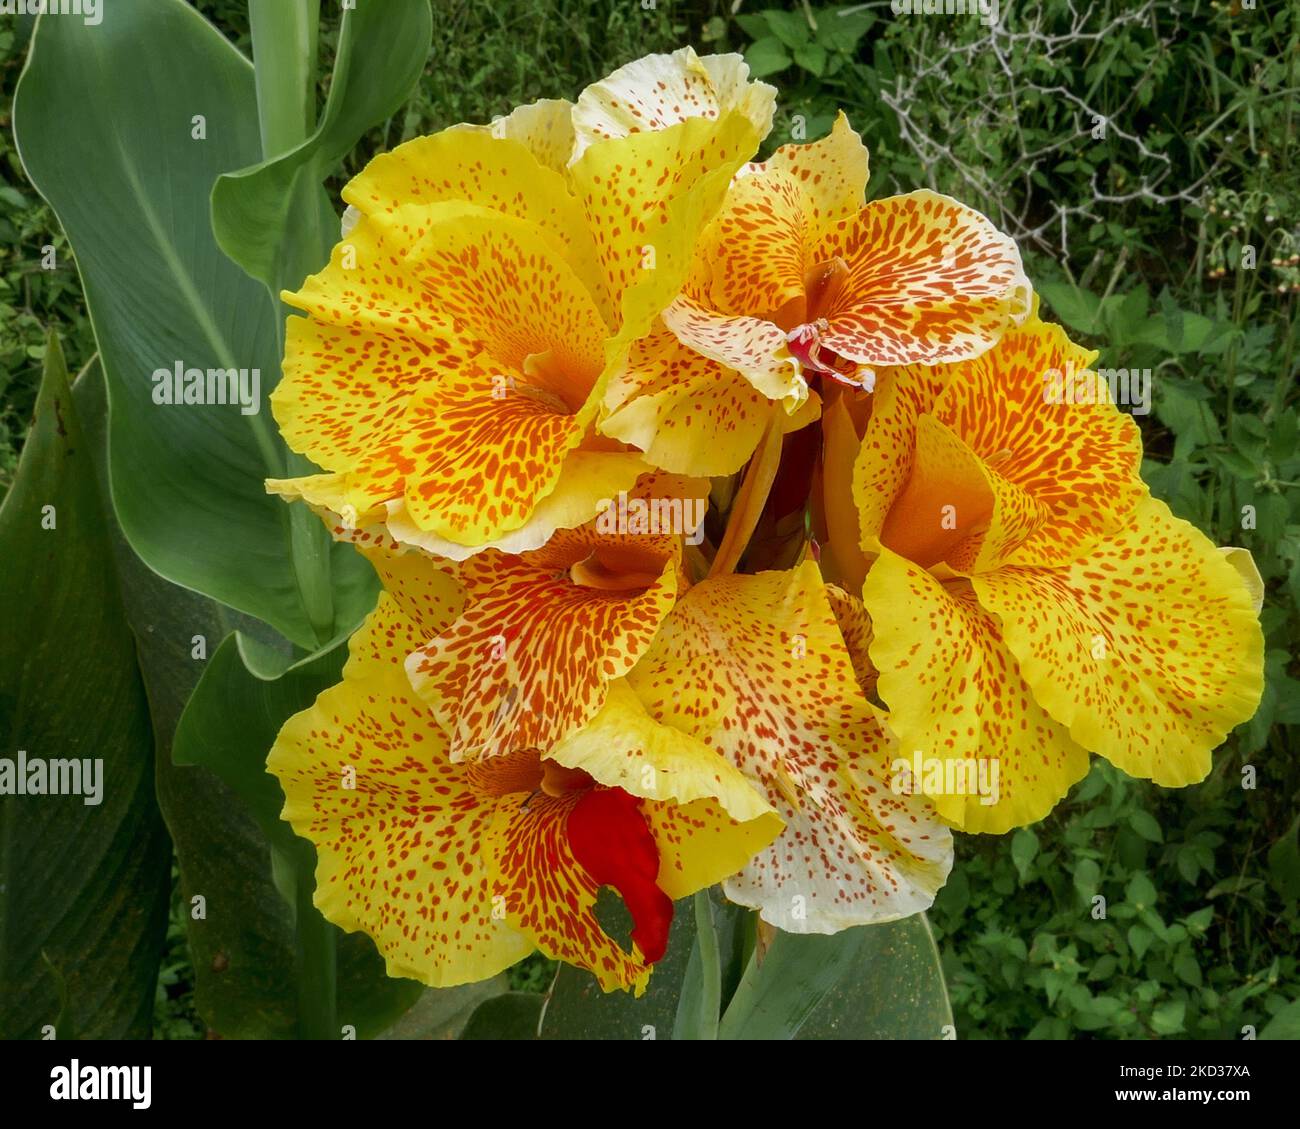 Closeup view of bright and colorful yellow and red canna lily flowers blooming on the slopes of Mahawu volcano, Tomohon, North Sulawesi, Indonesia Stock Photo